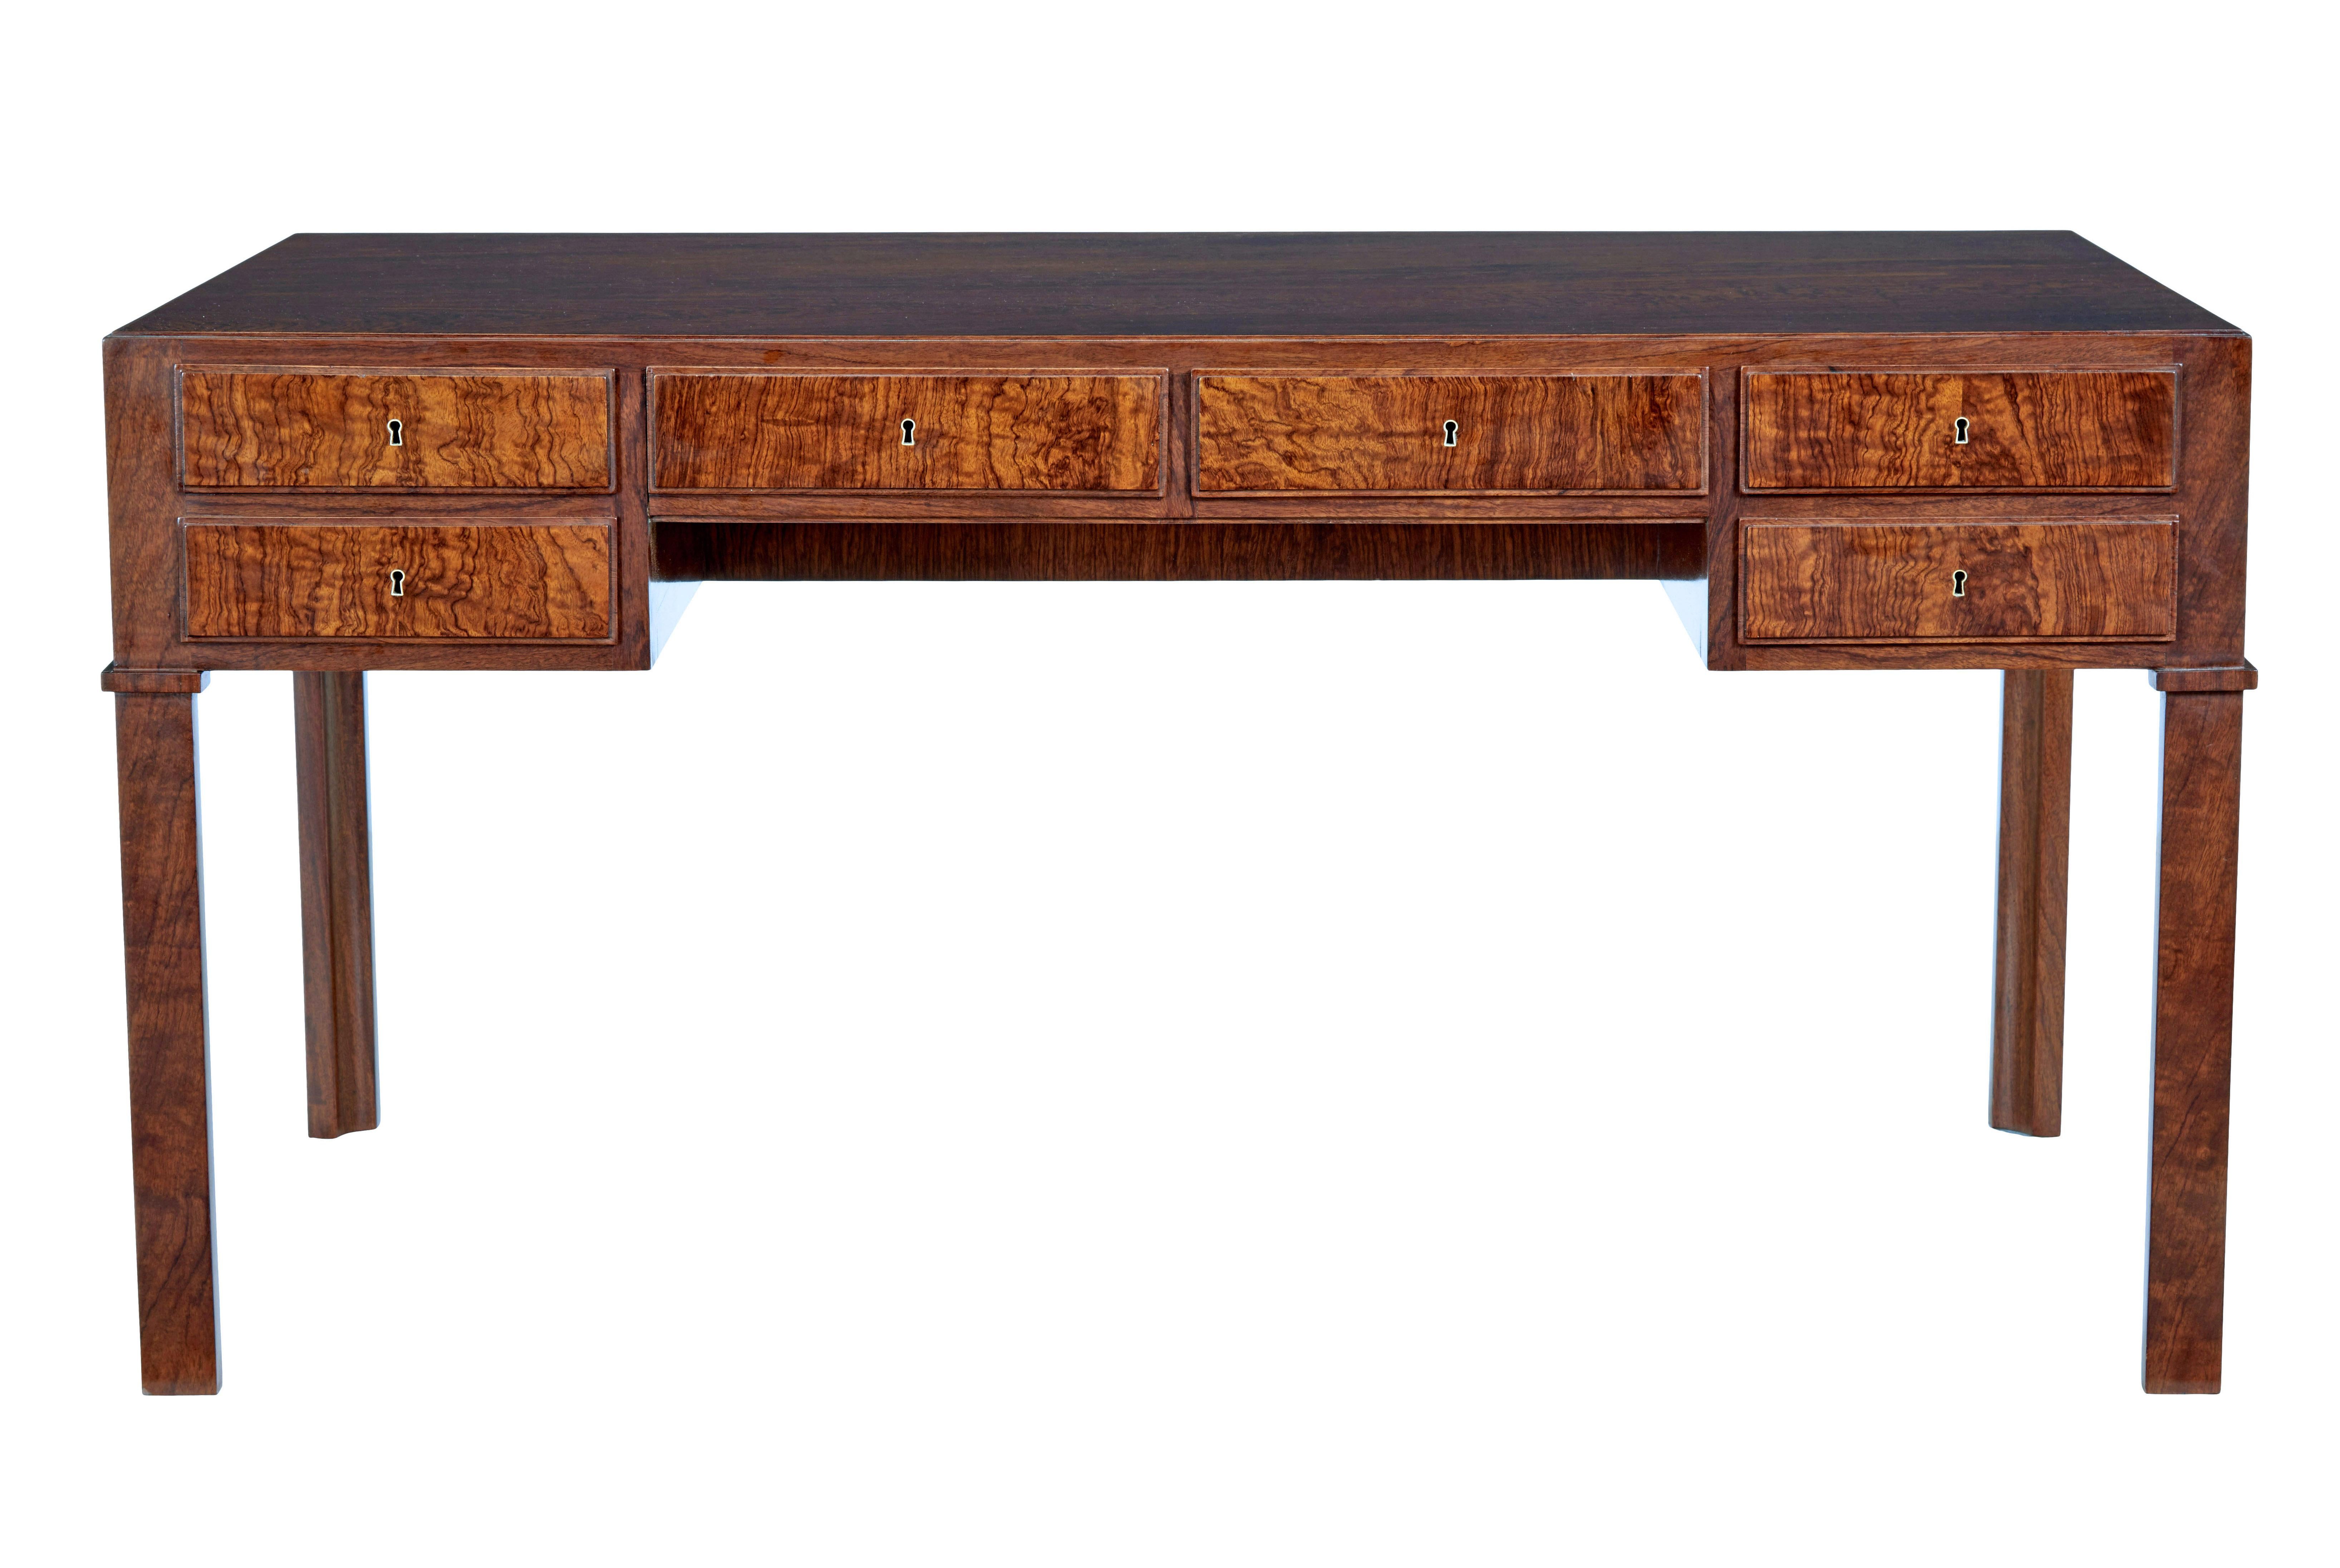 Danish mid 20th century burr walnut desk circa 1950.

We are please to offer this desk which is of the highest quality.

Stunning top with a single veneer covering the whole writing surface.   Veneered to the reverse making this desk free standing. 